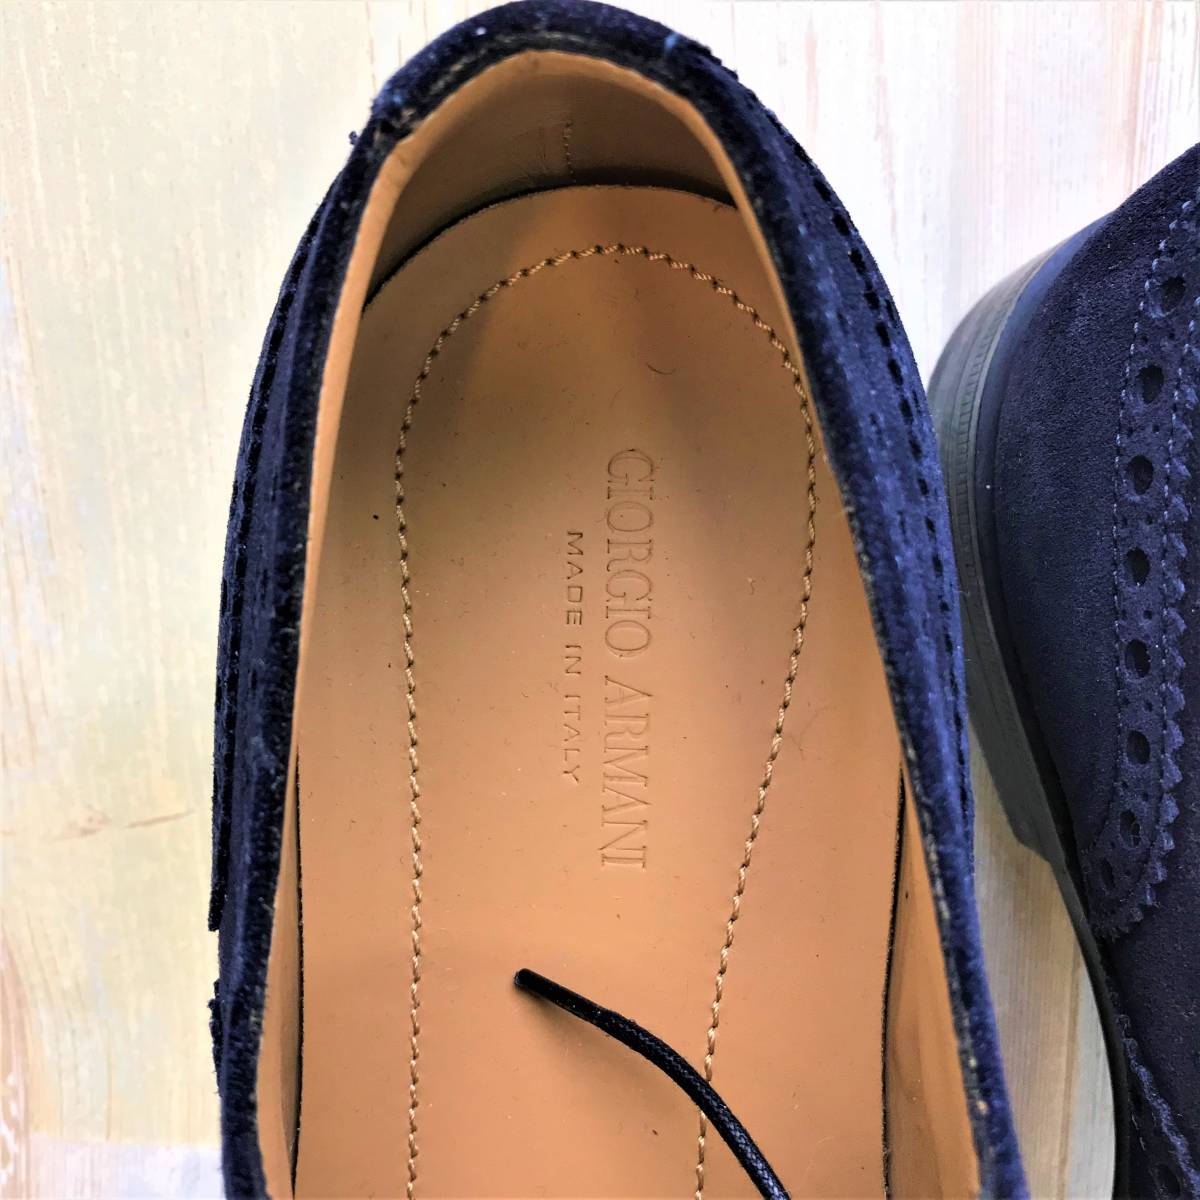  new goods *GIORGIO ARMANIjoru geo Armani wing chip suede shoes shoes navy navy blue color leather * approximately 24.5cm US6.5 size 40.5